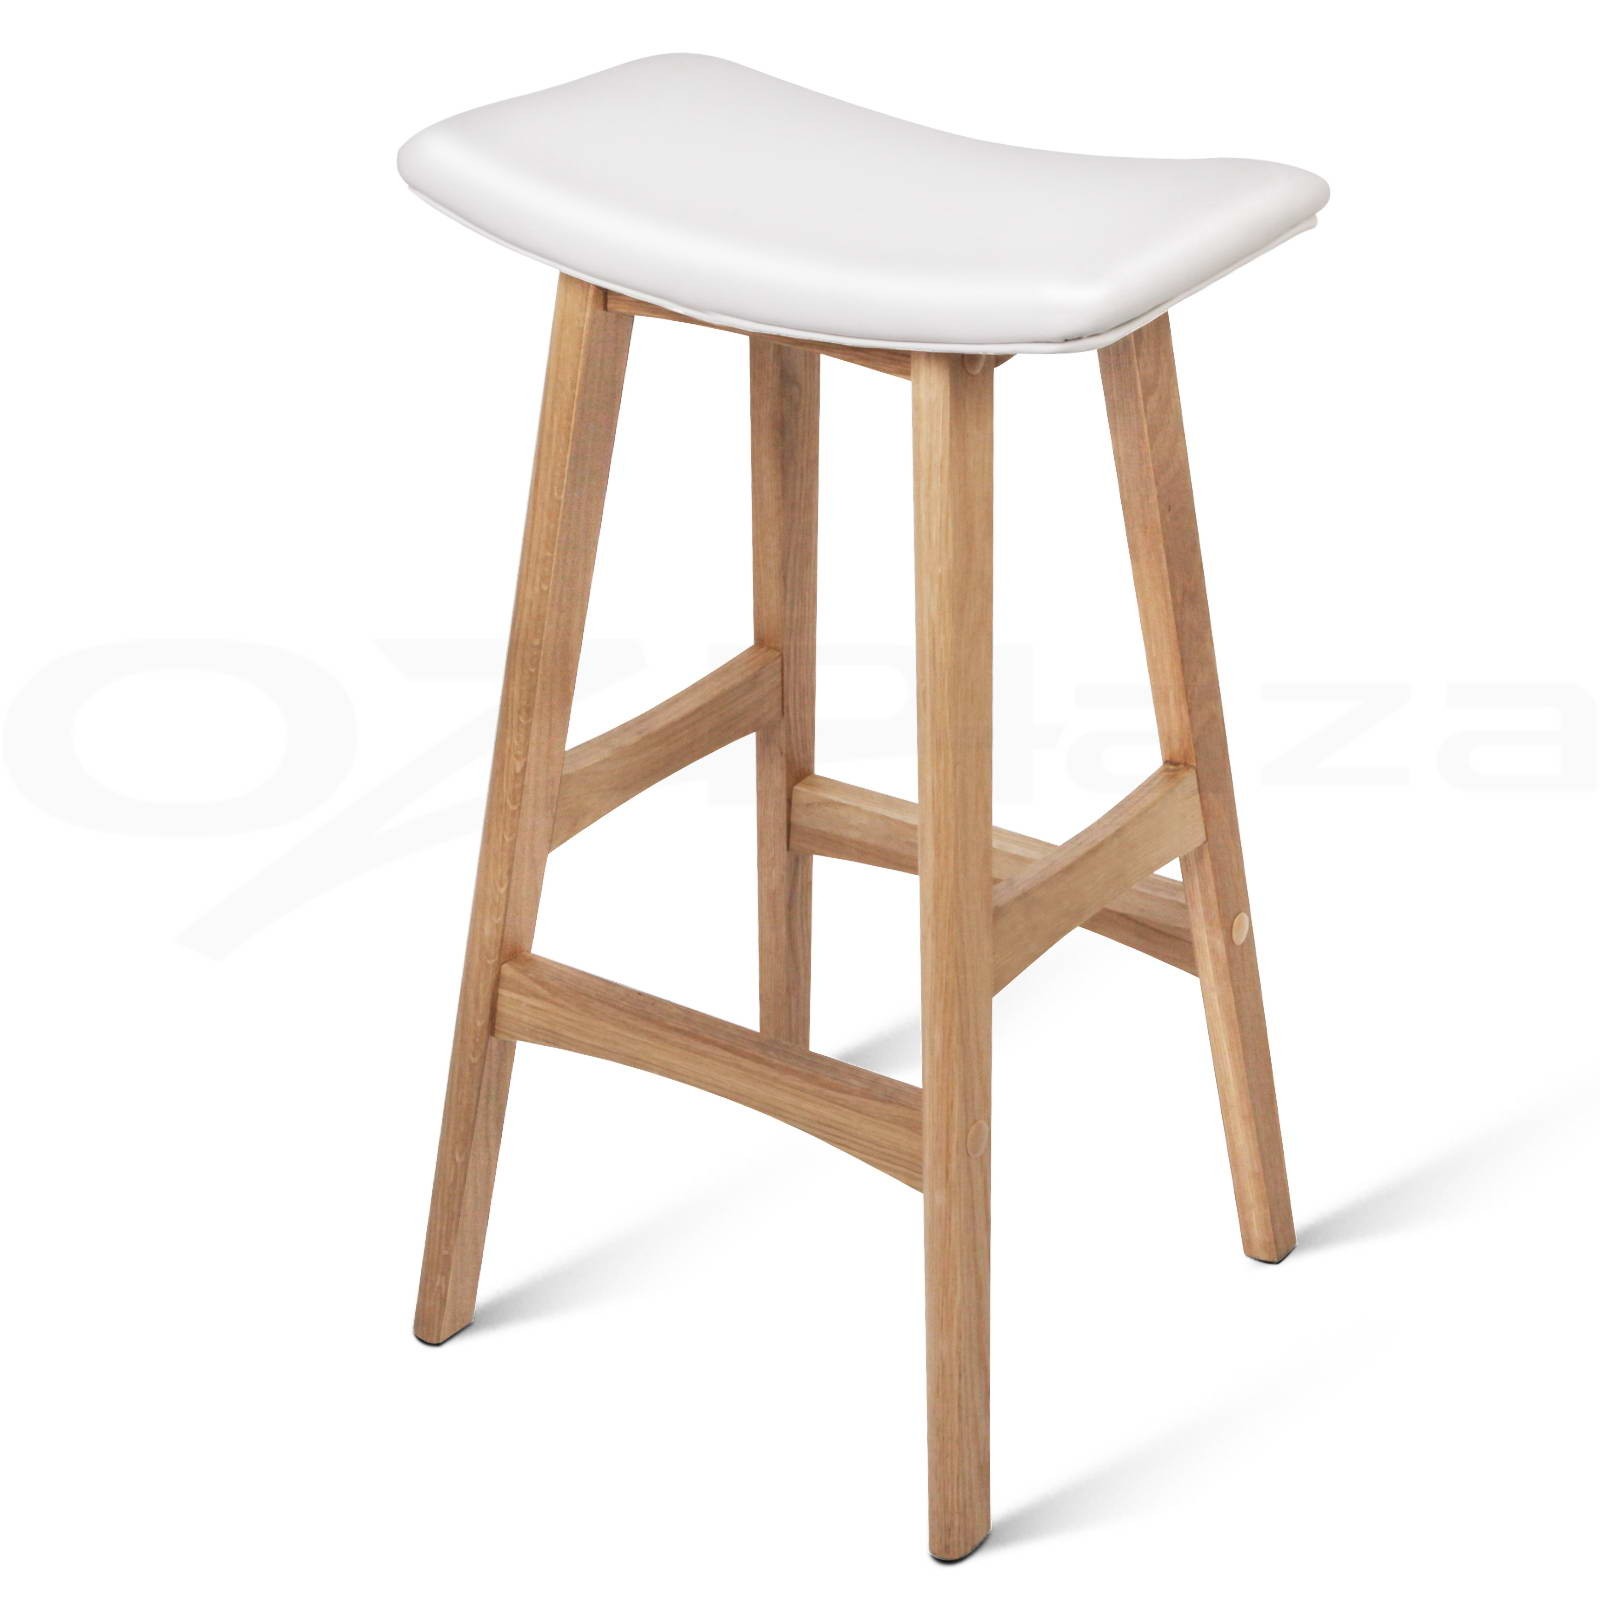 2x oak wood bar stools wooden barstool dining chairs